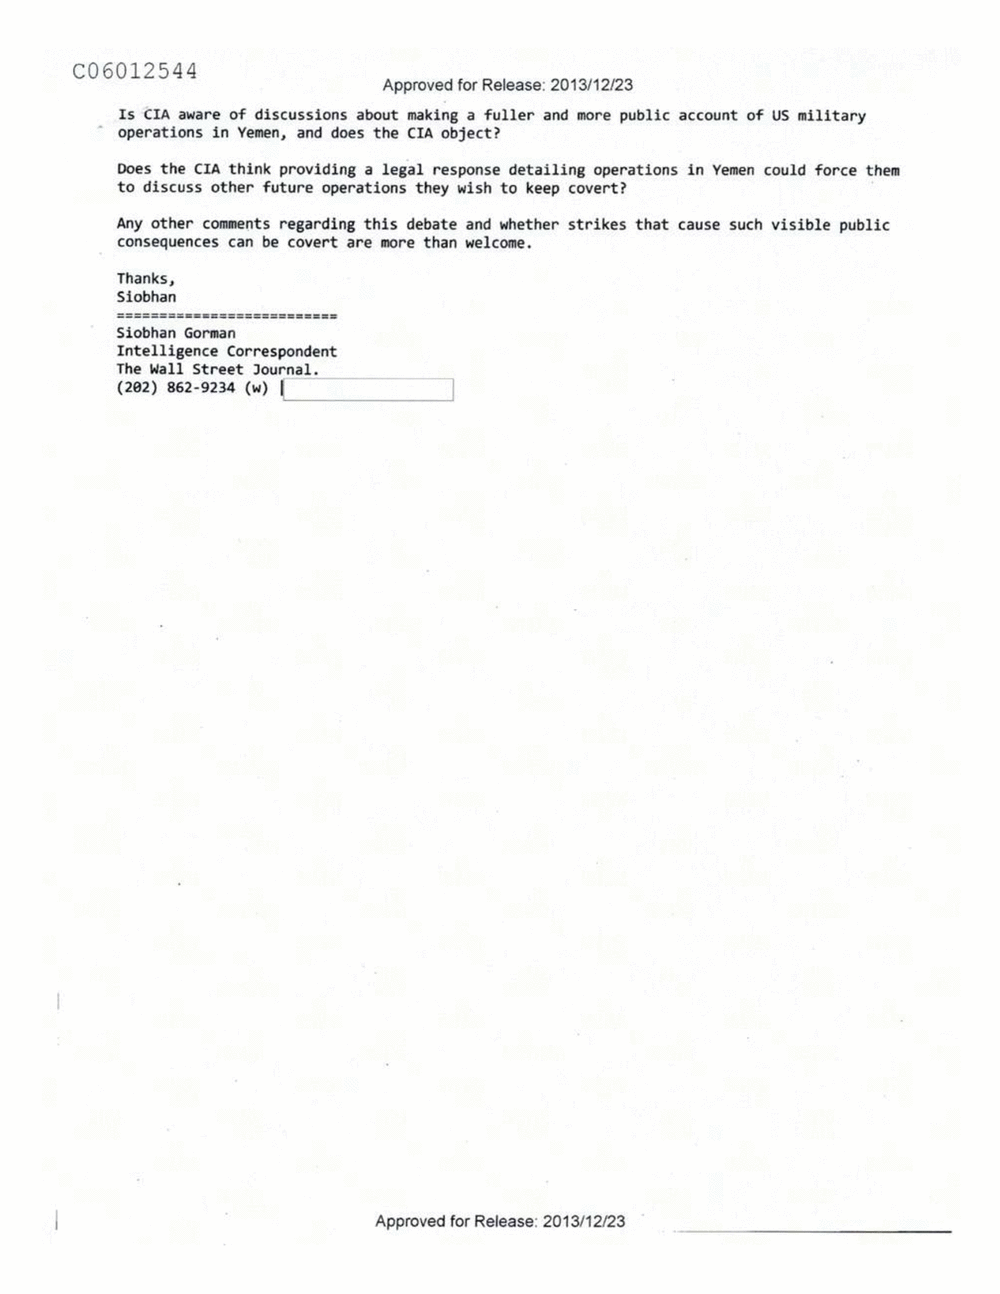 Page 78 from Email Correspondence Between Reporters and CIA Flacks